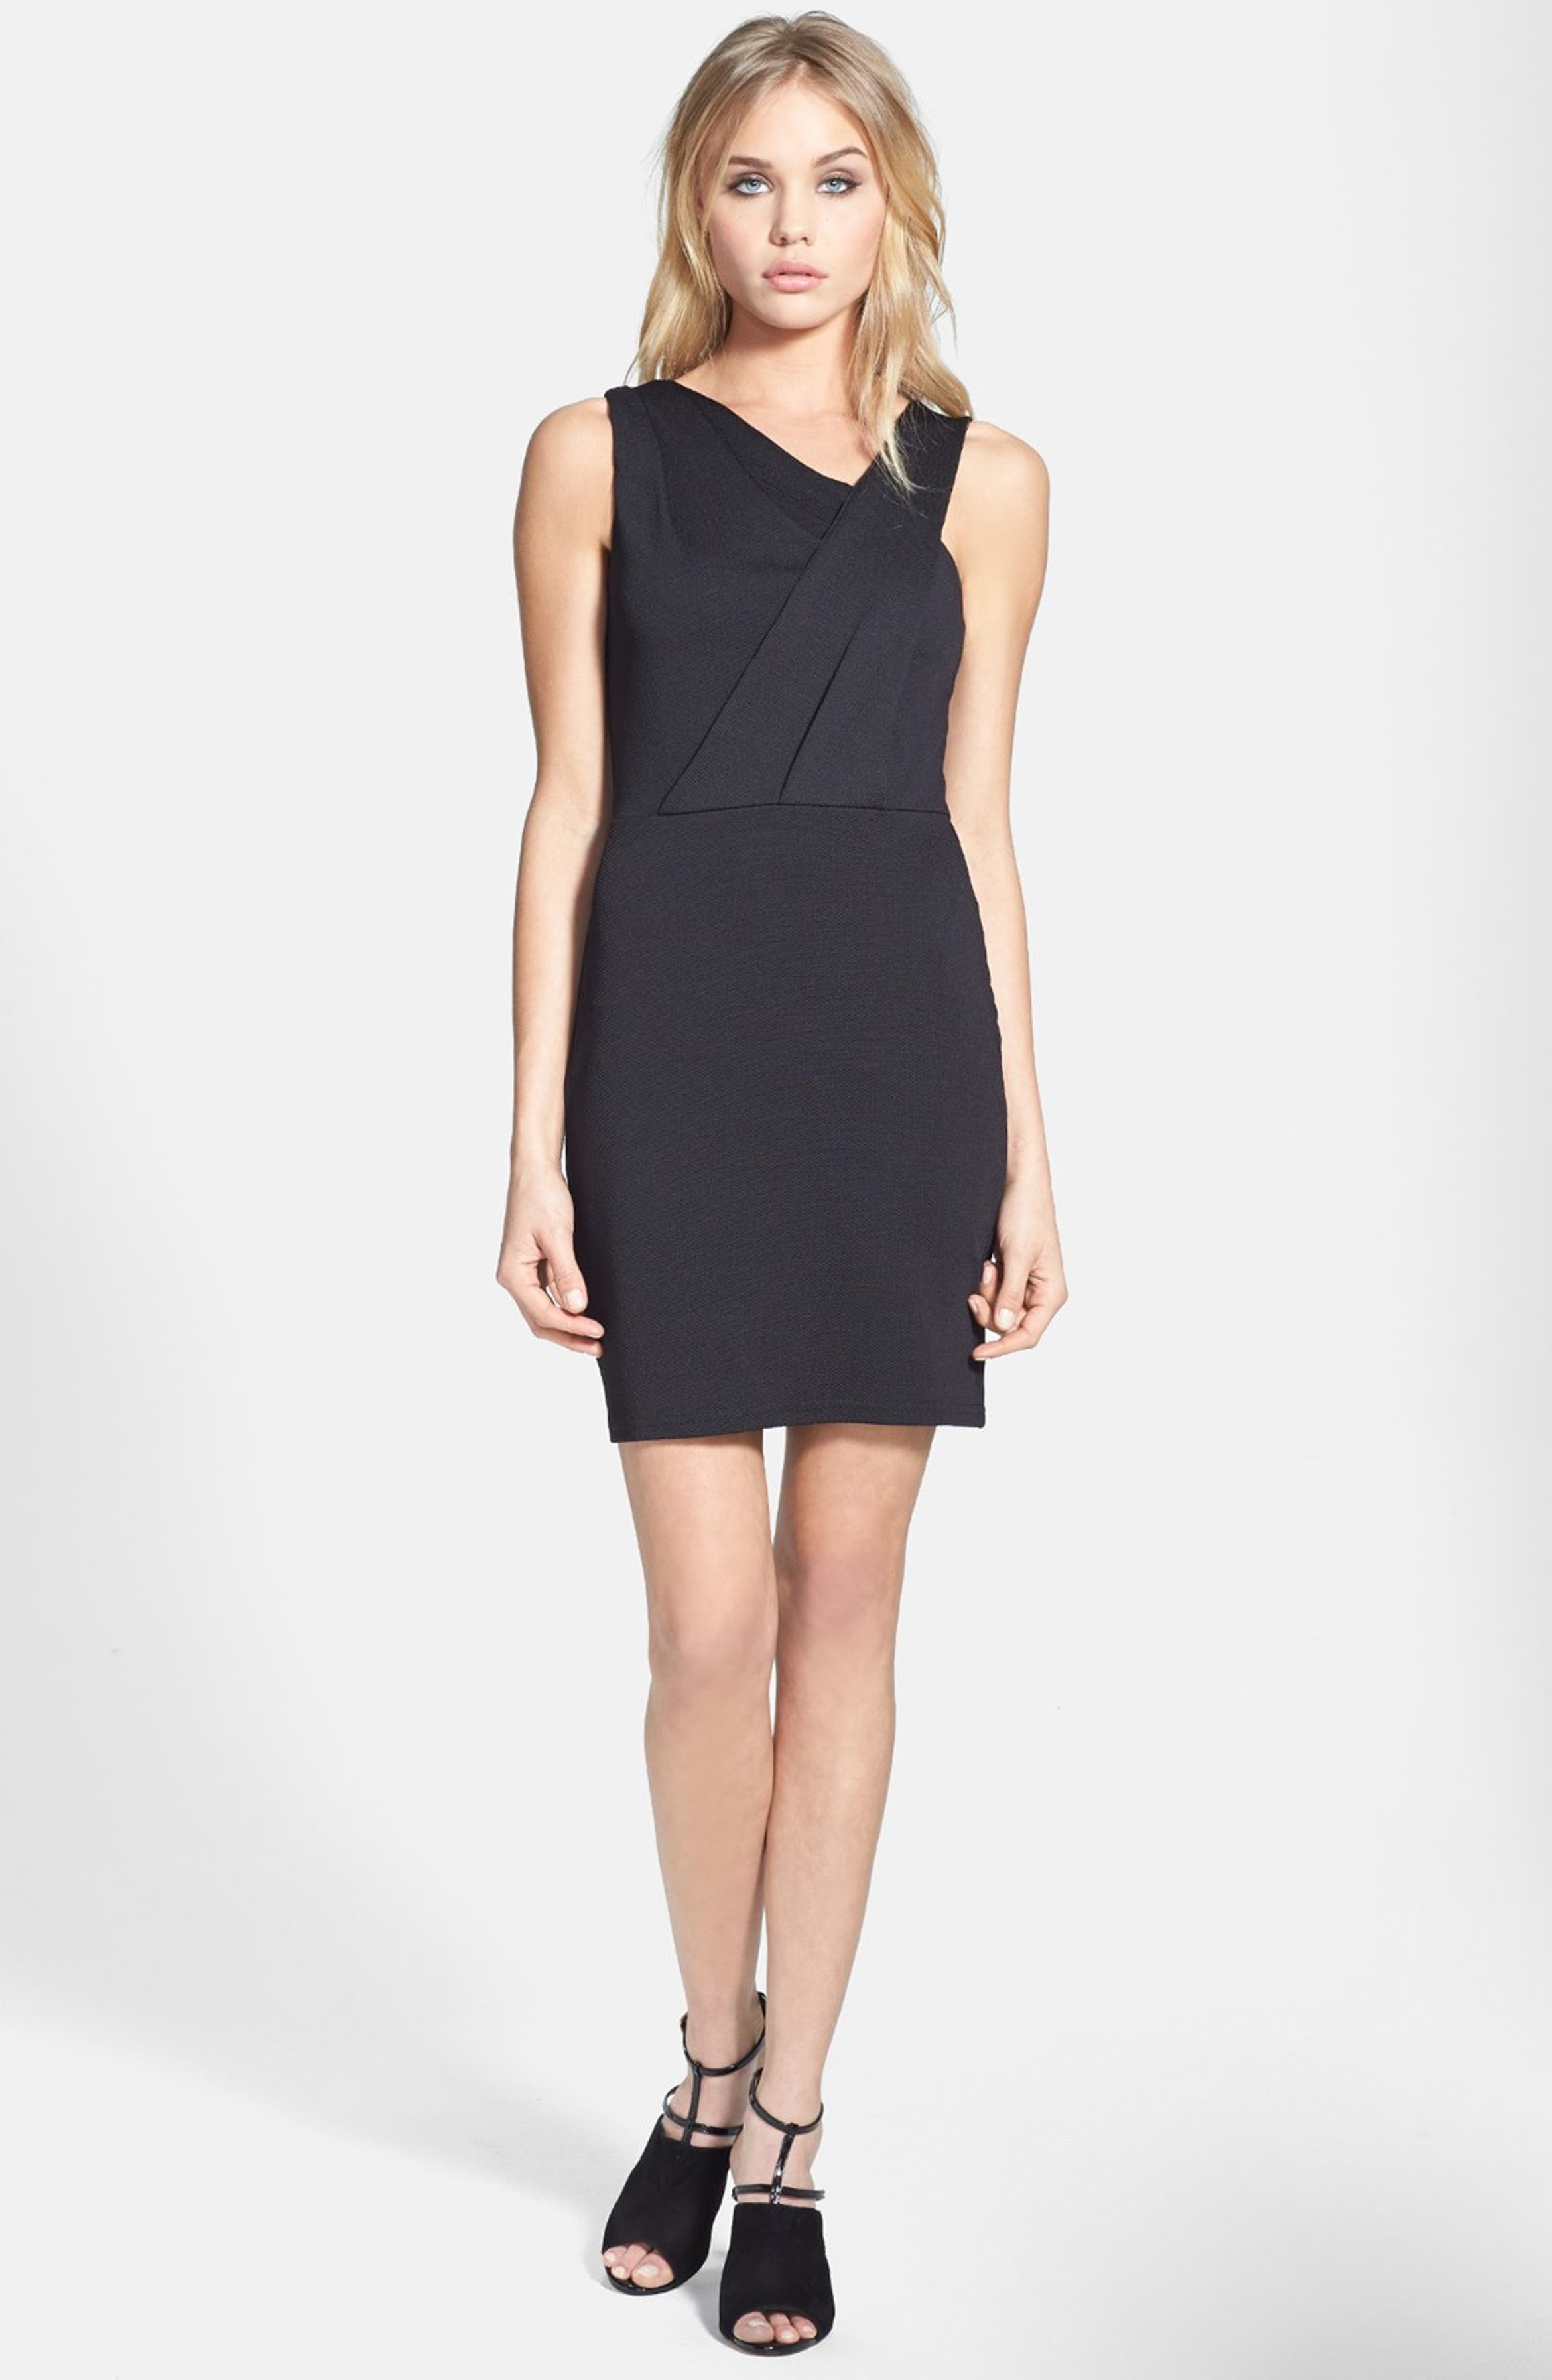 Topshop Pleated Bodice Dress | Nordstrom